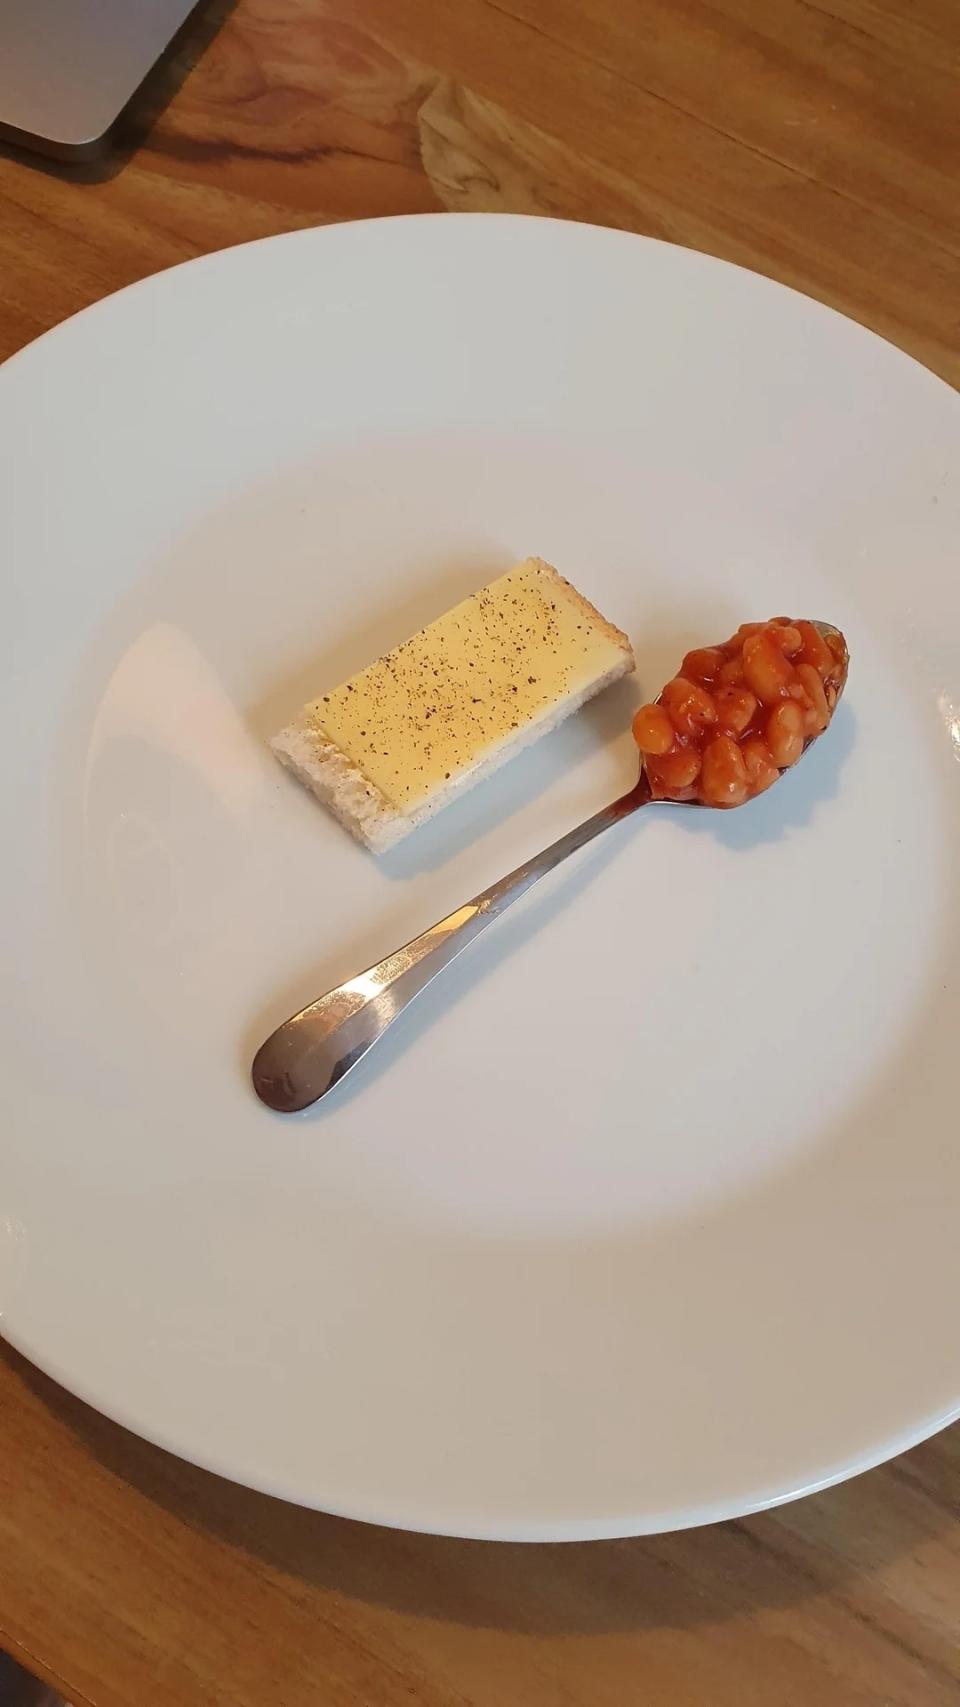 A plate with a cheese-topped cracker and a spoonful of baked beans